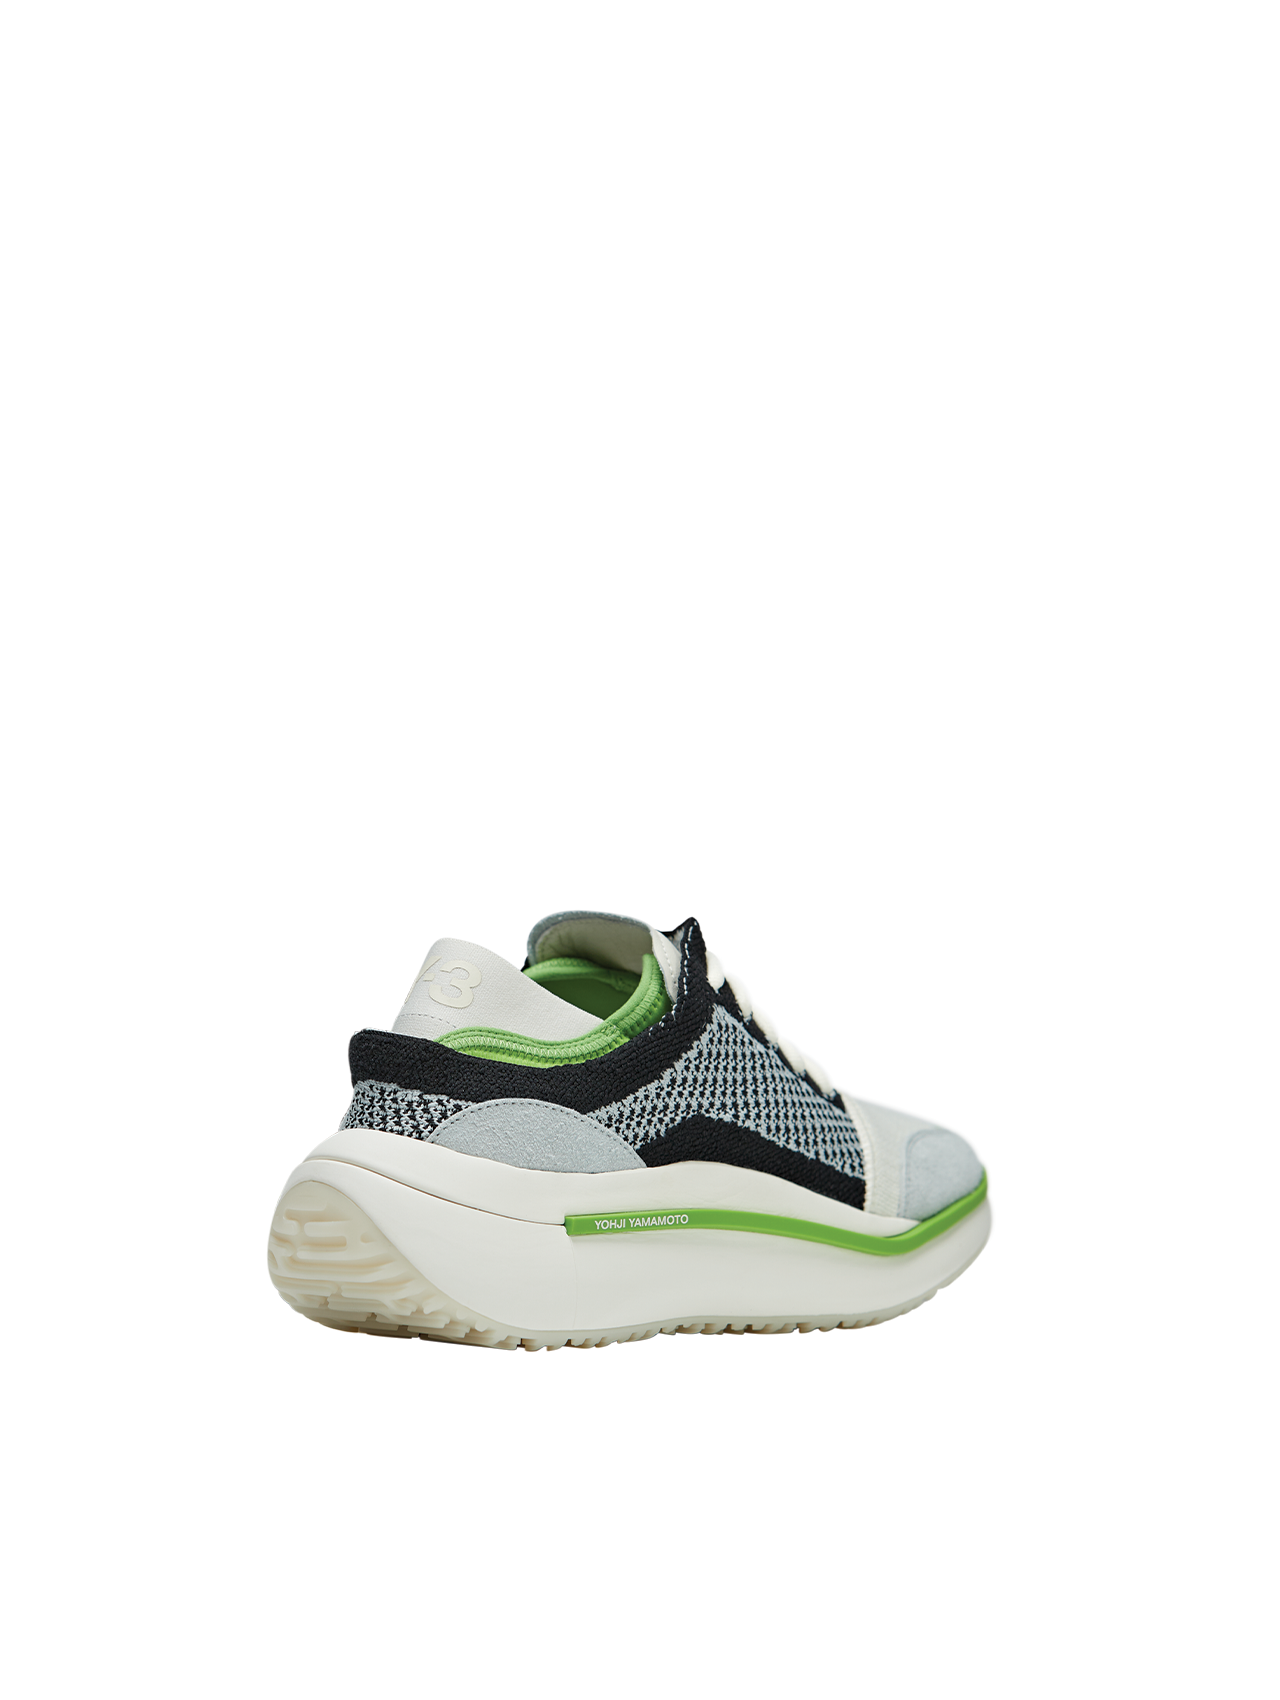 Y-3 White/Silver/Team Rave Green Qisan Knit Sneakers